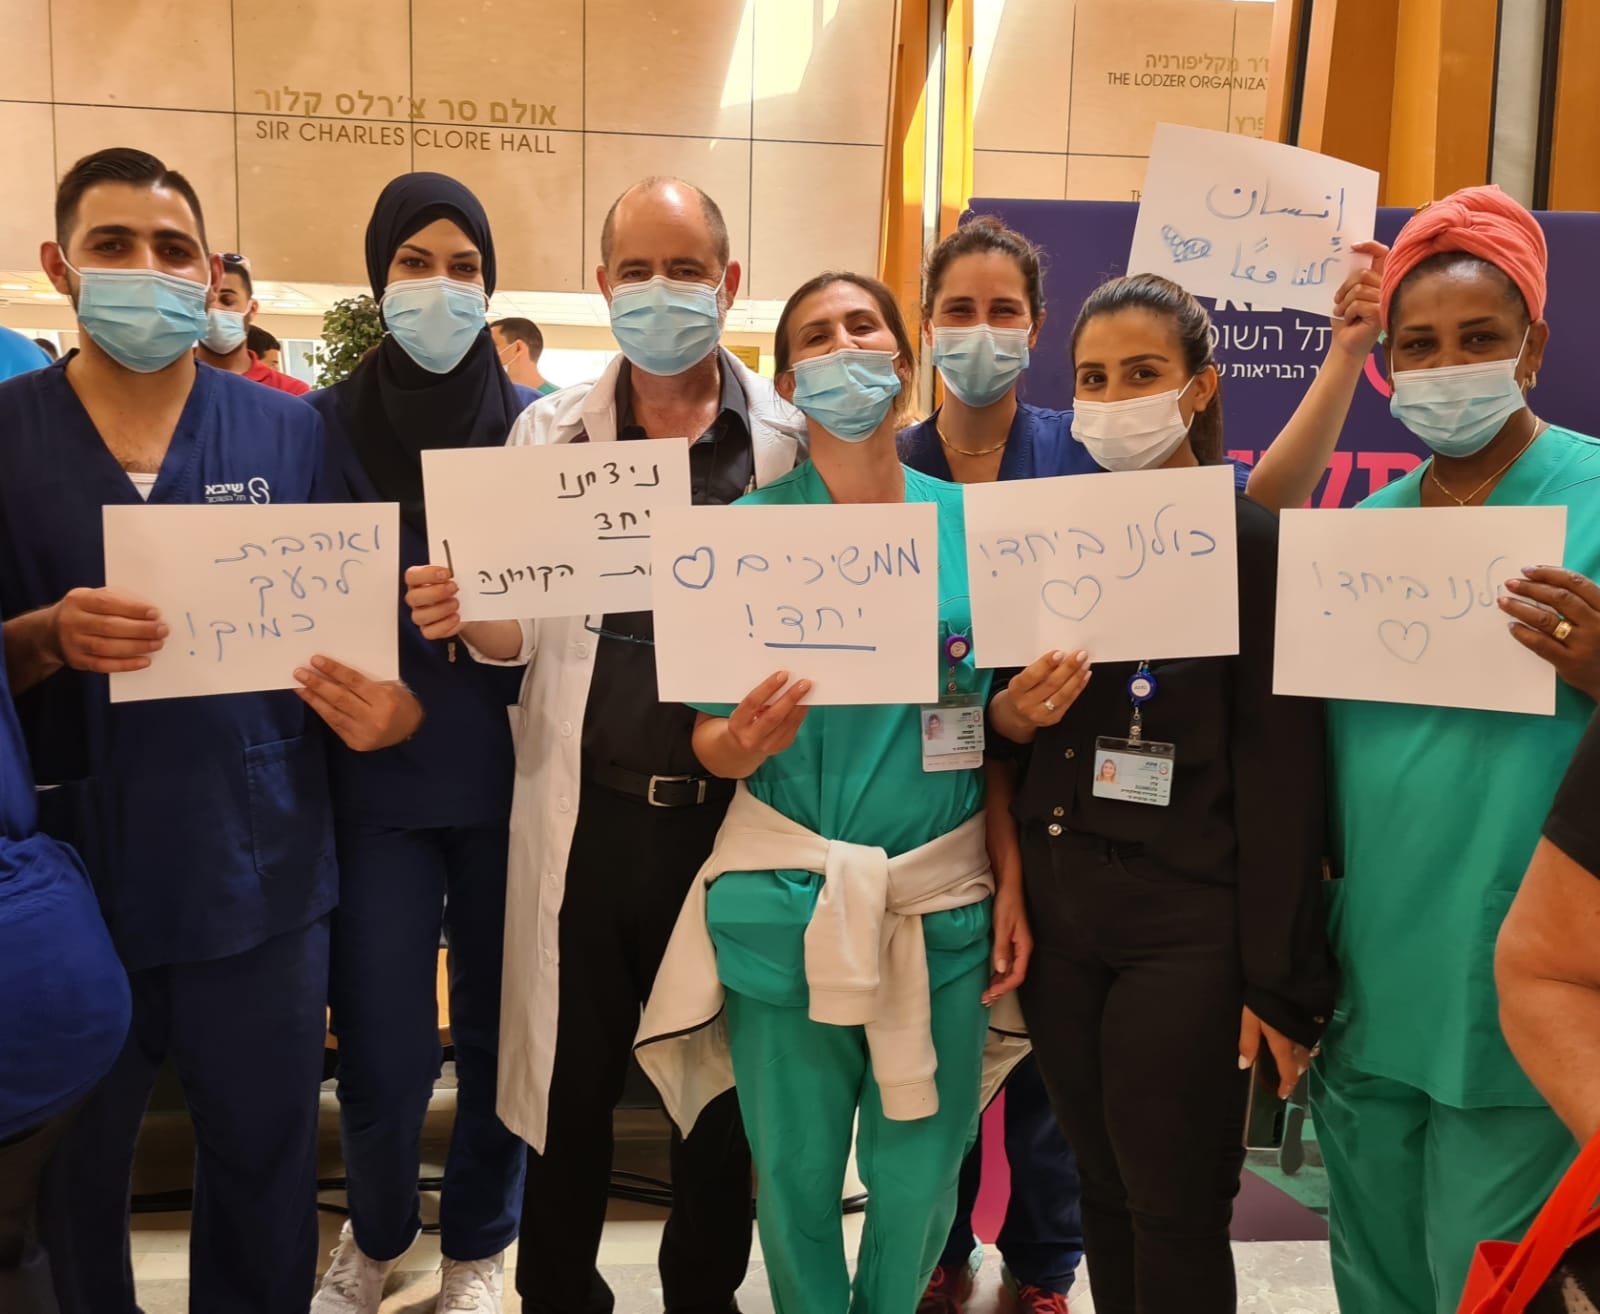 Staff at Sheba Medical Center in Tel Hashomer show their unity in the face of Israel’s troubles. Photo courtesy of Sheba Medical Center